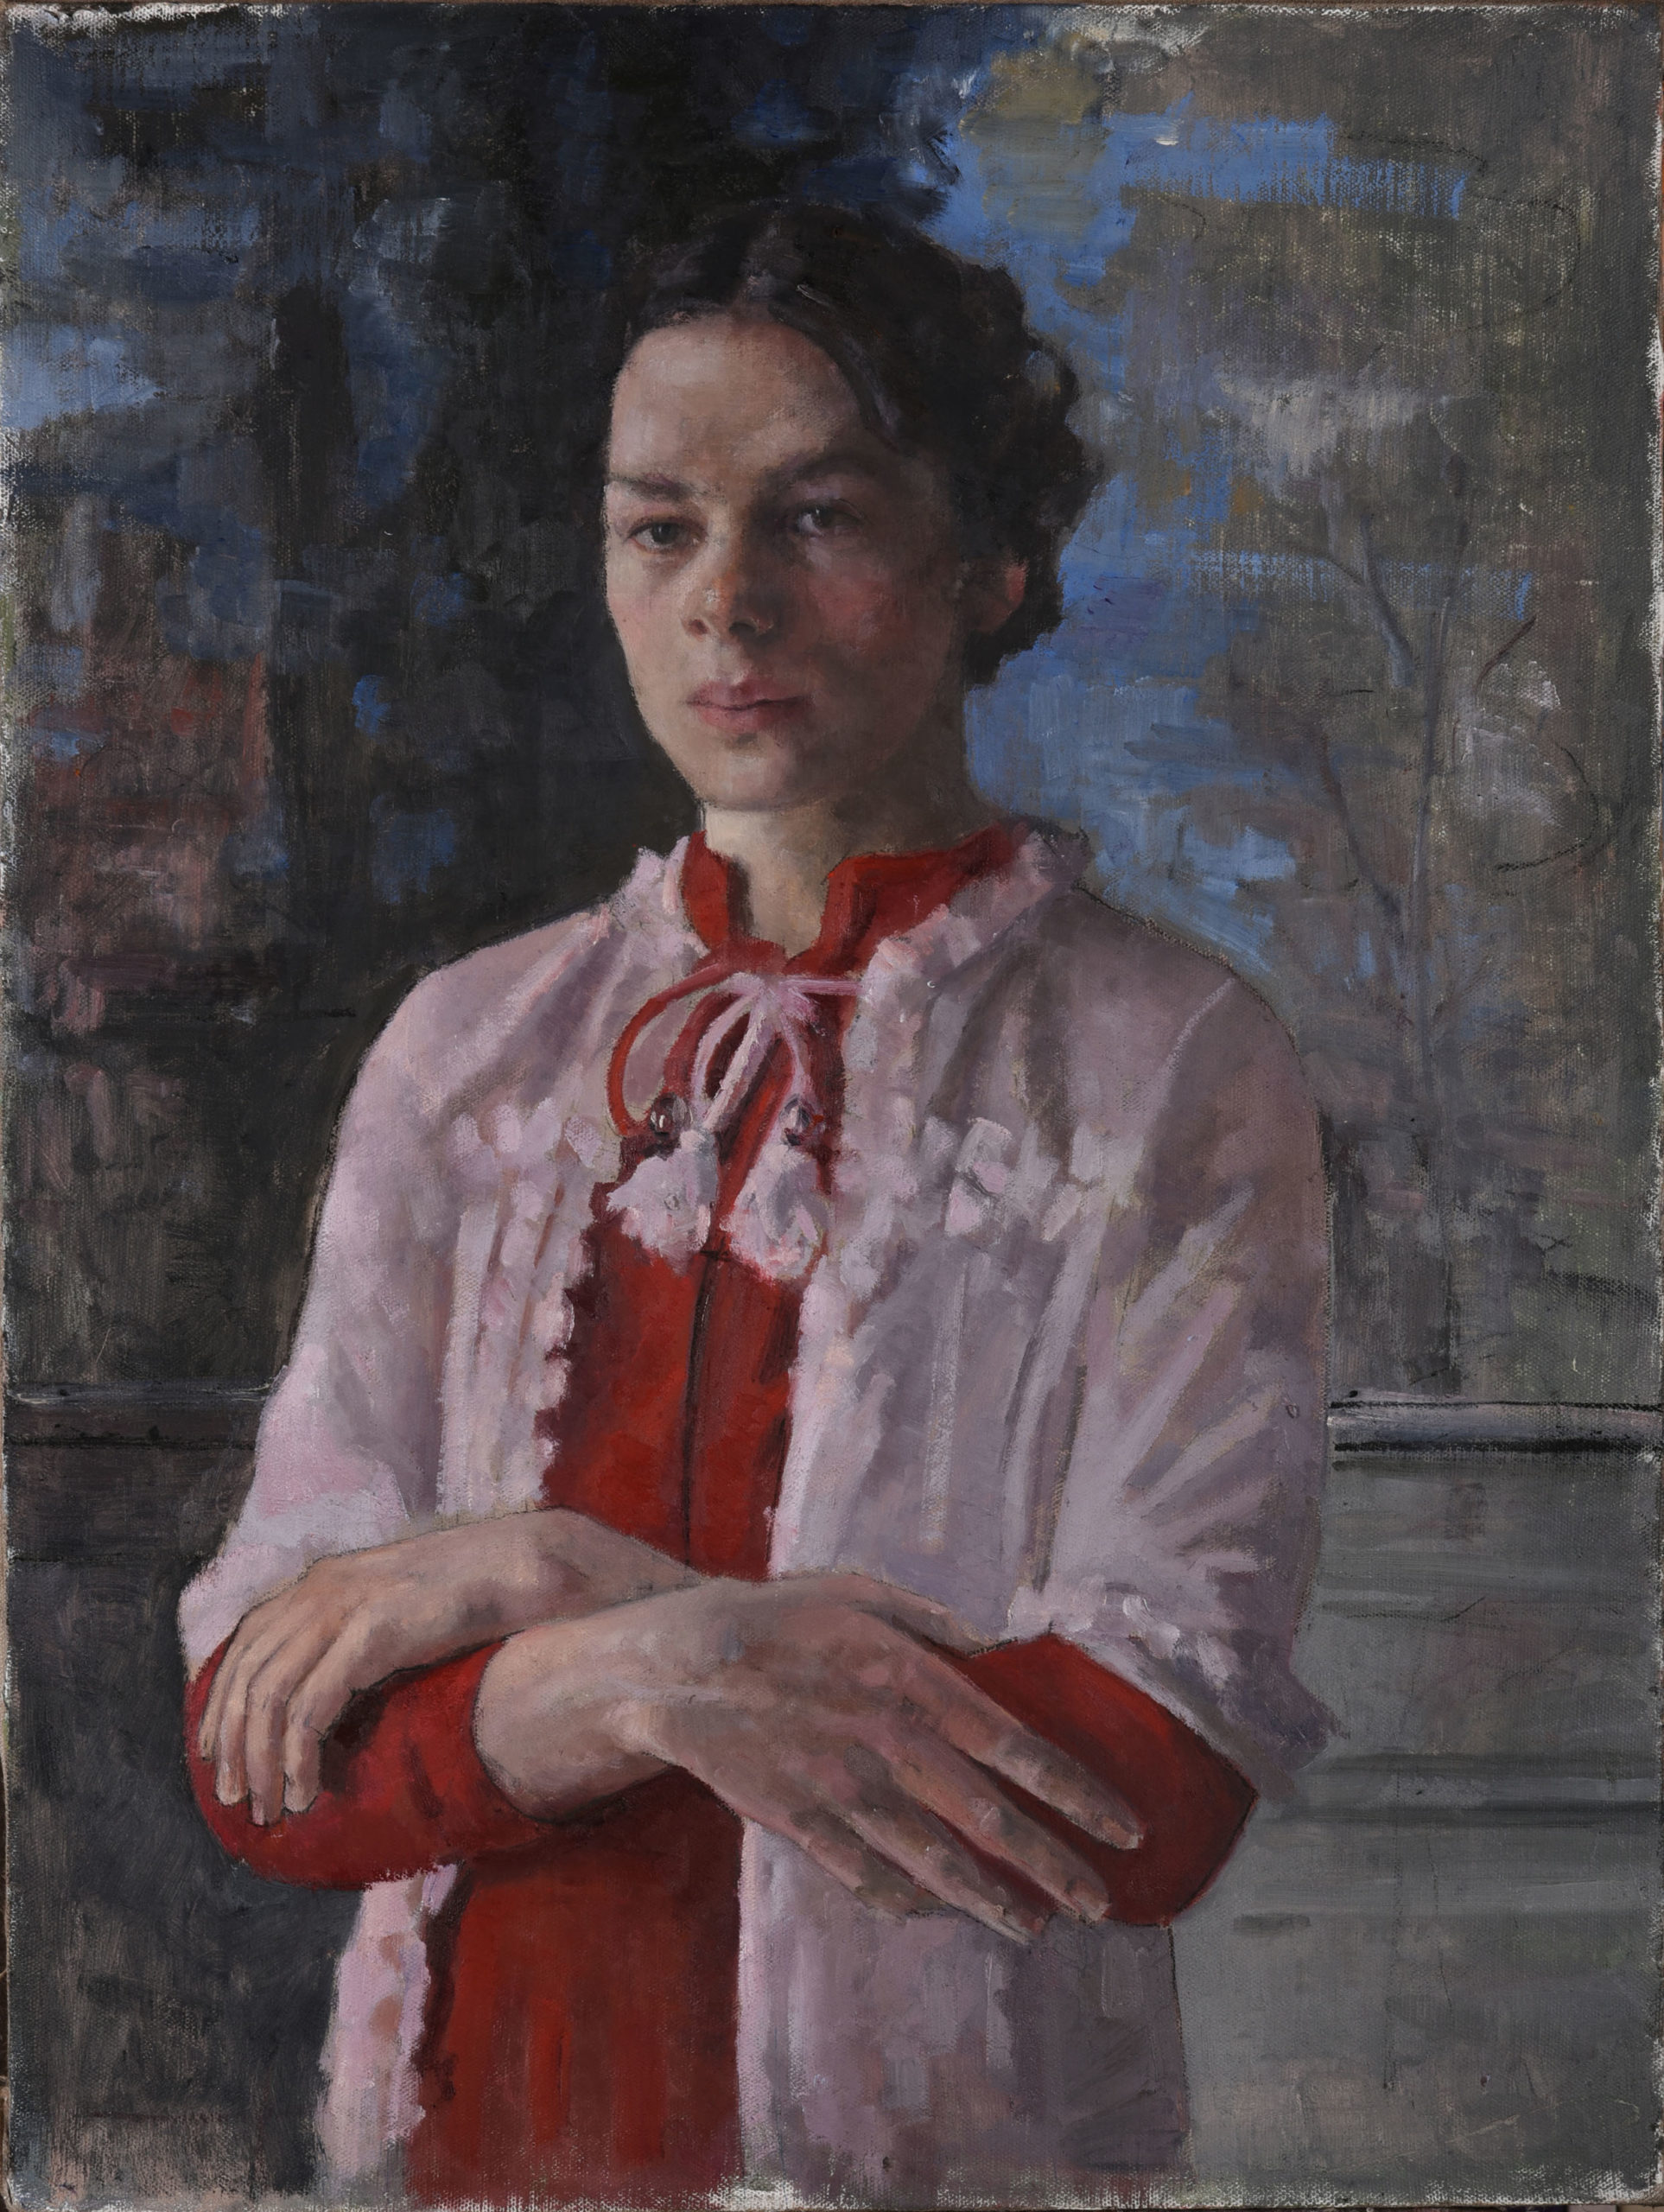 Roni Taharlev, “Boy with a Red Dress,” 2019, Oil on linen mounted on panel, 80 x 60 cm